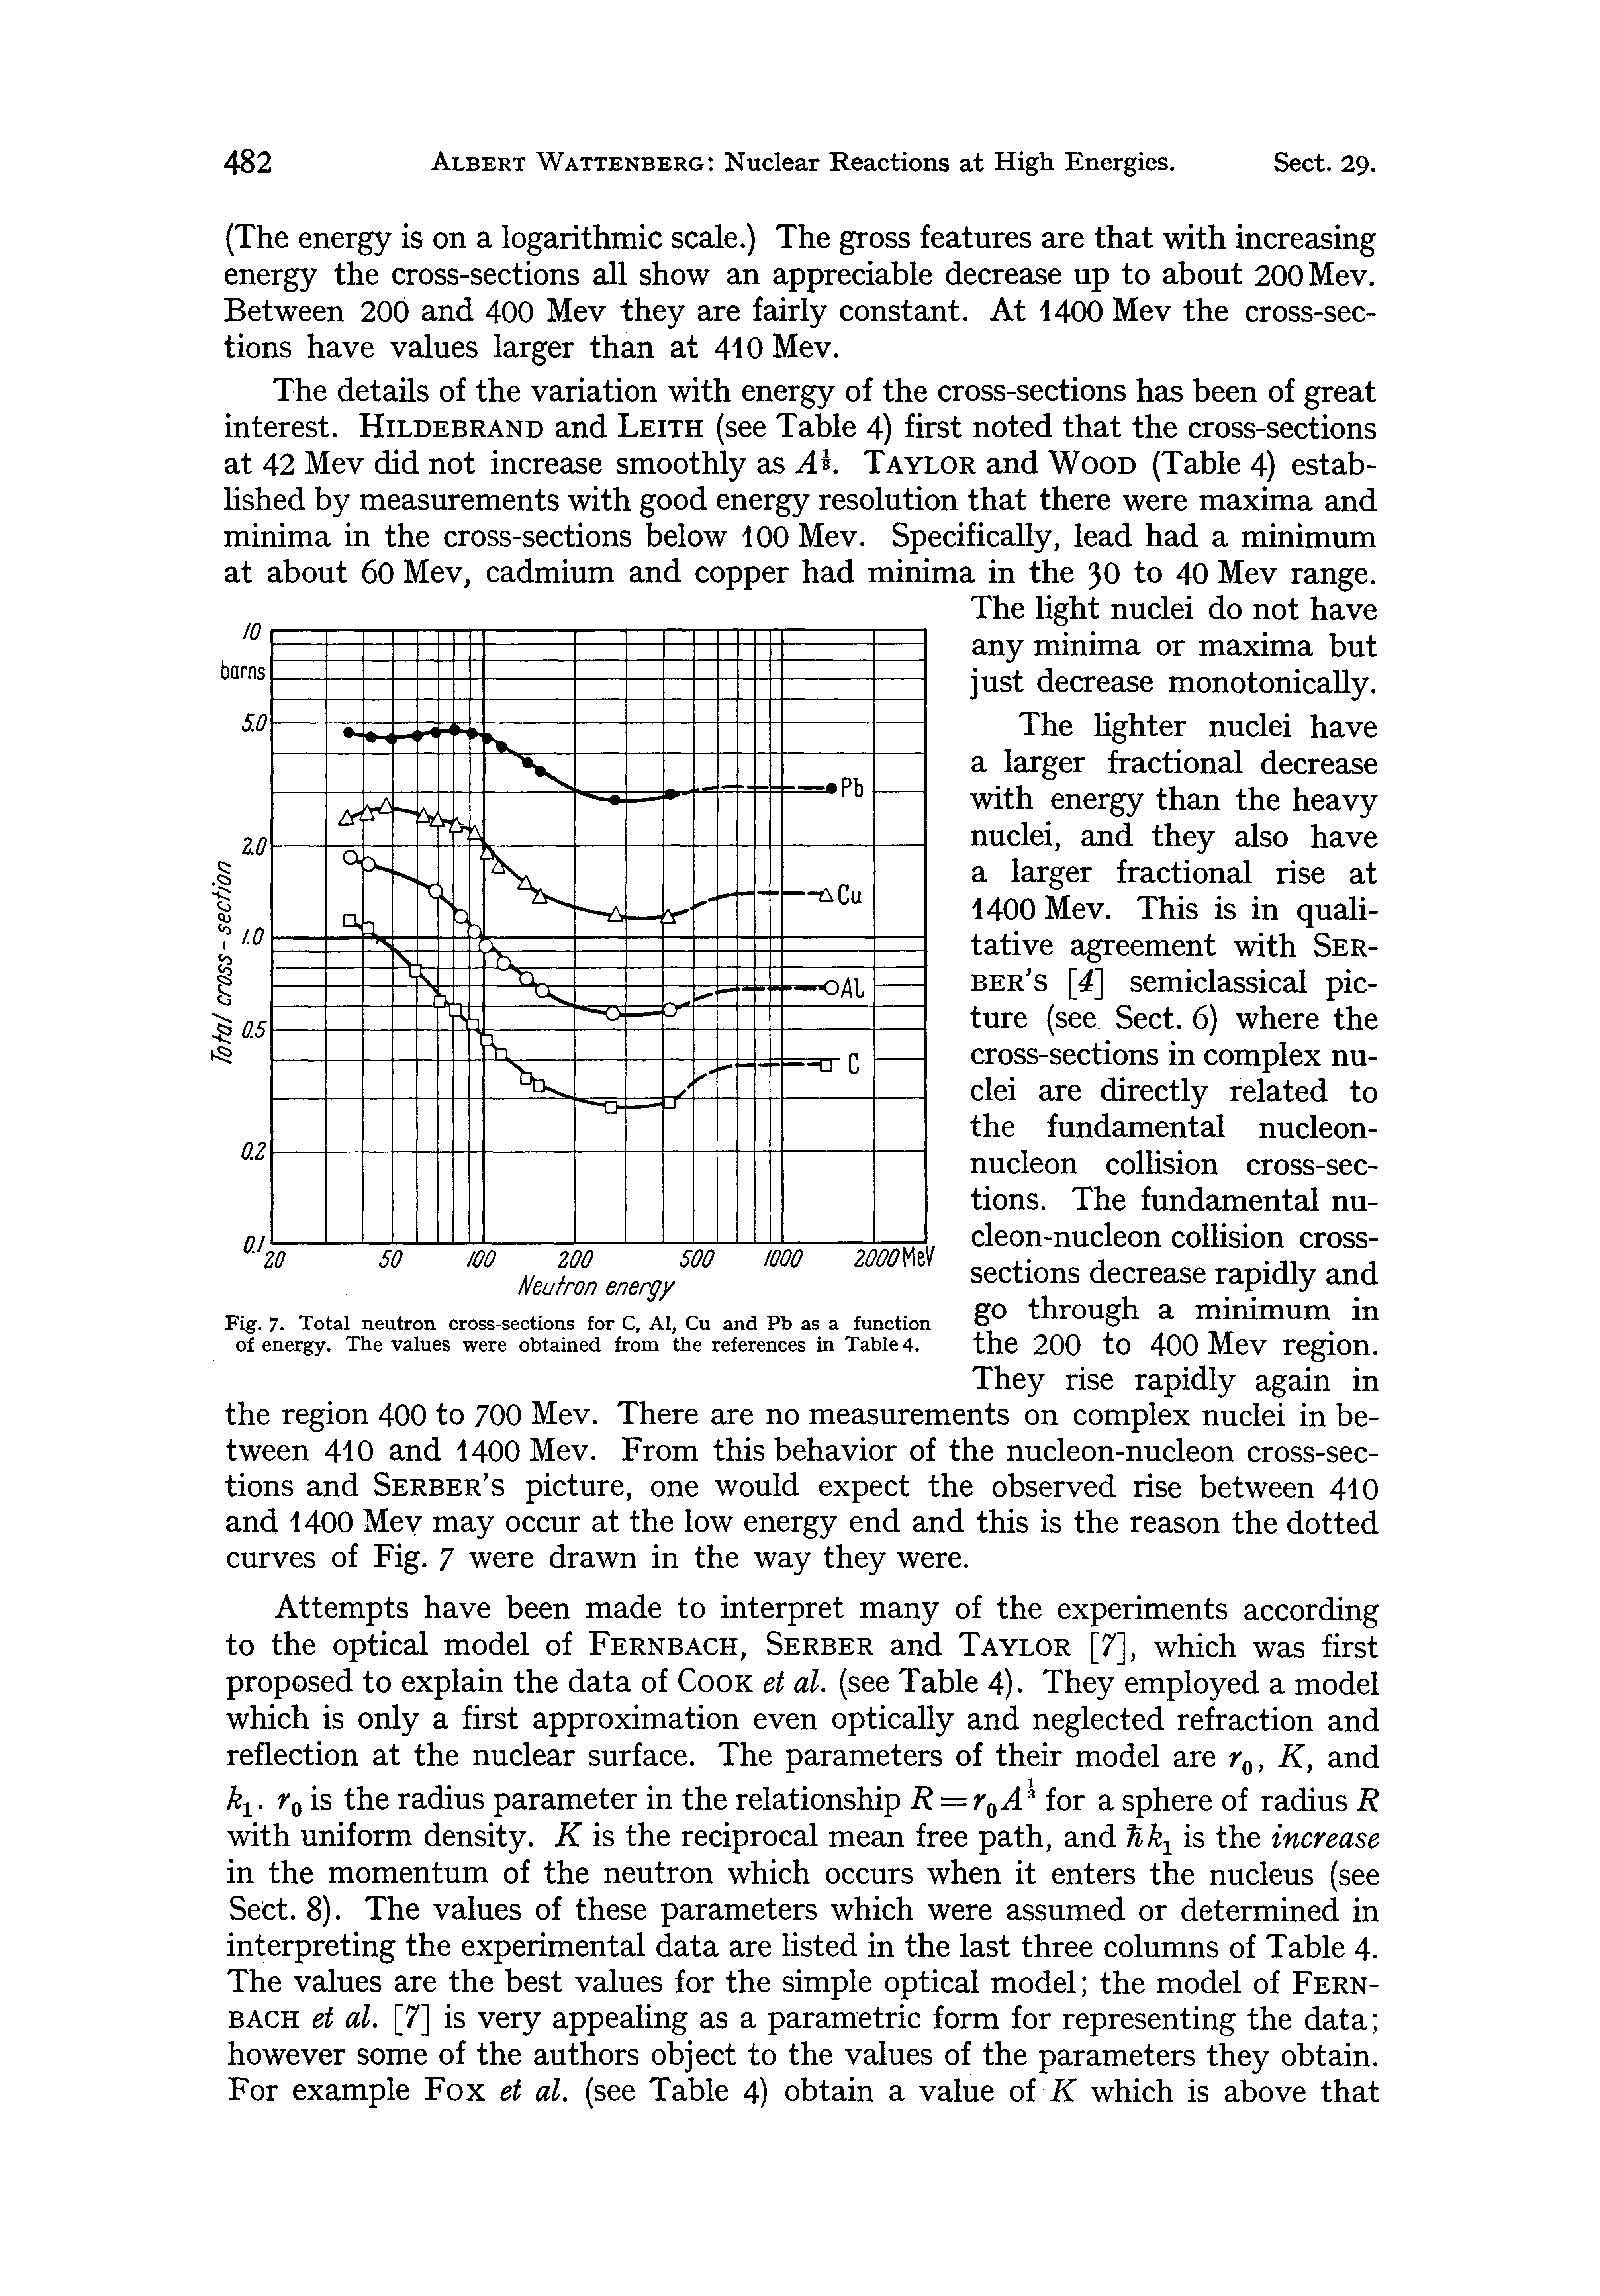 Fig. 7. Total neutron cross-sections for C, Al, Cu and Pb as a function of energy. The values were obtained from the references in Table 4.